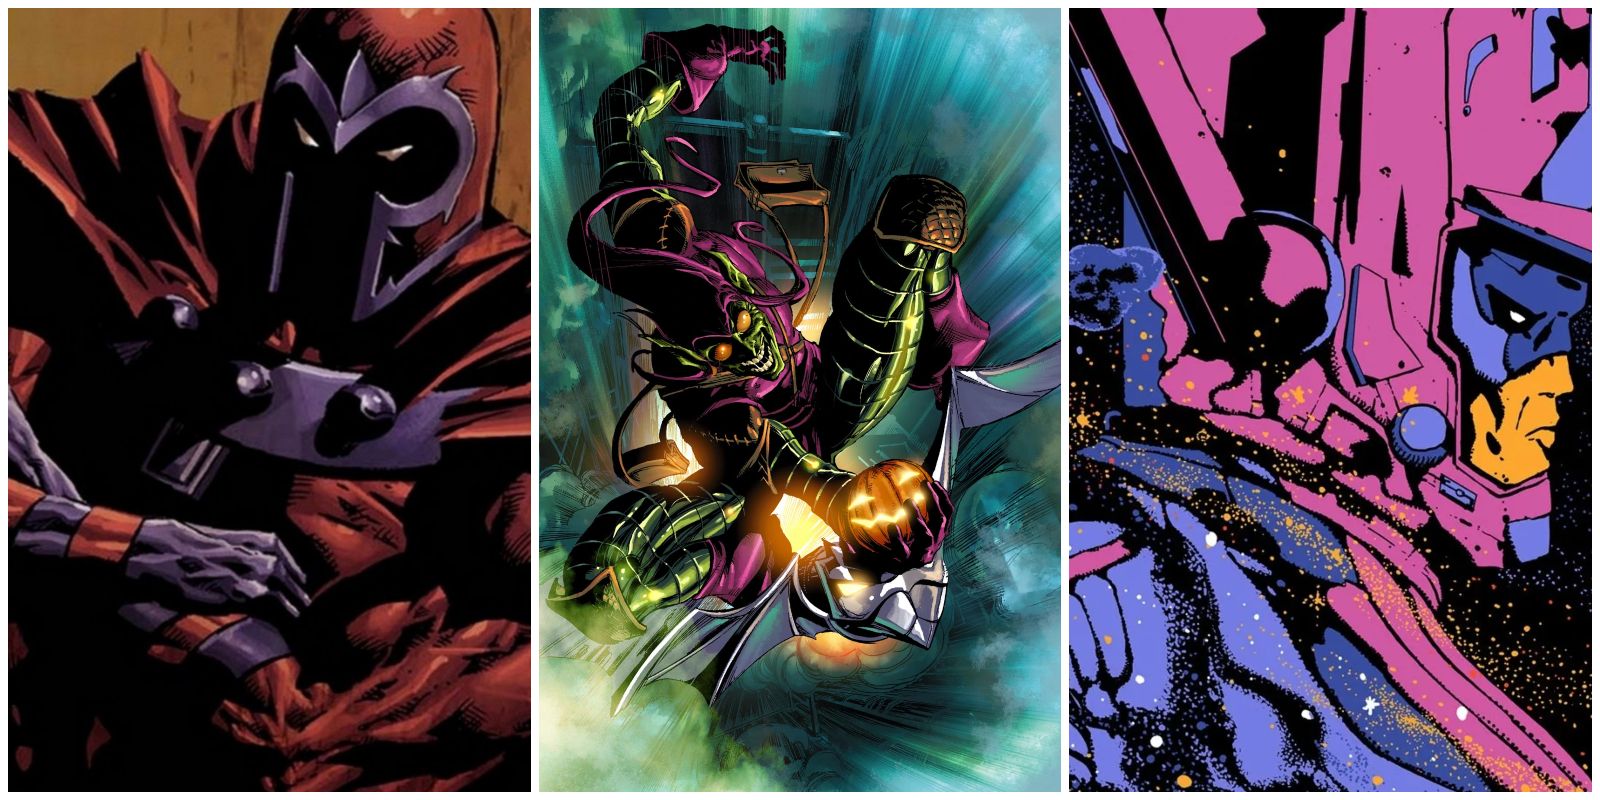 Magneto, Green Goblin, and Galactus artwork from Marvel Comics